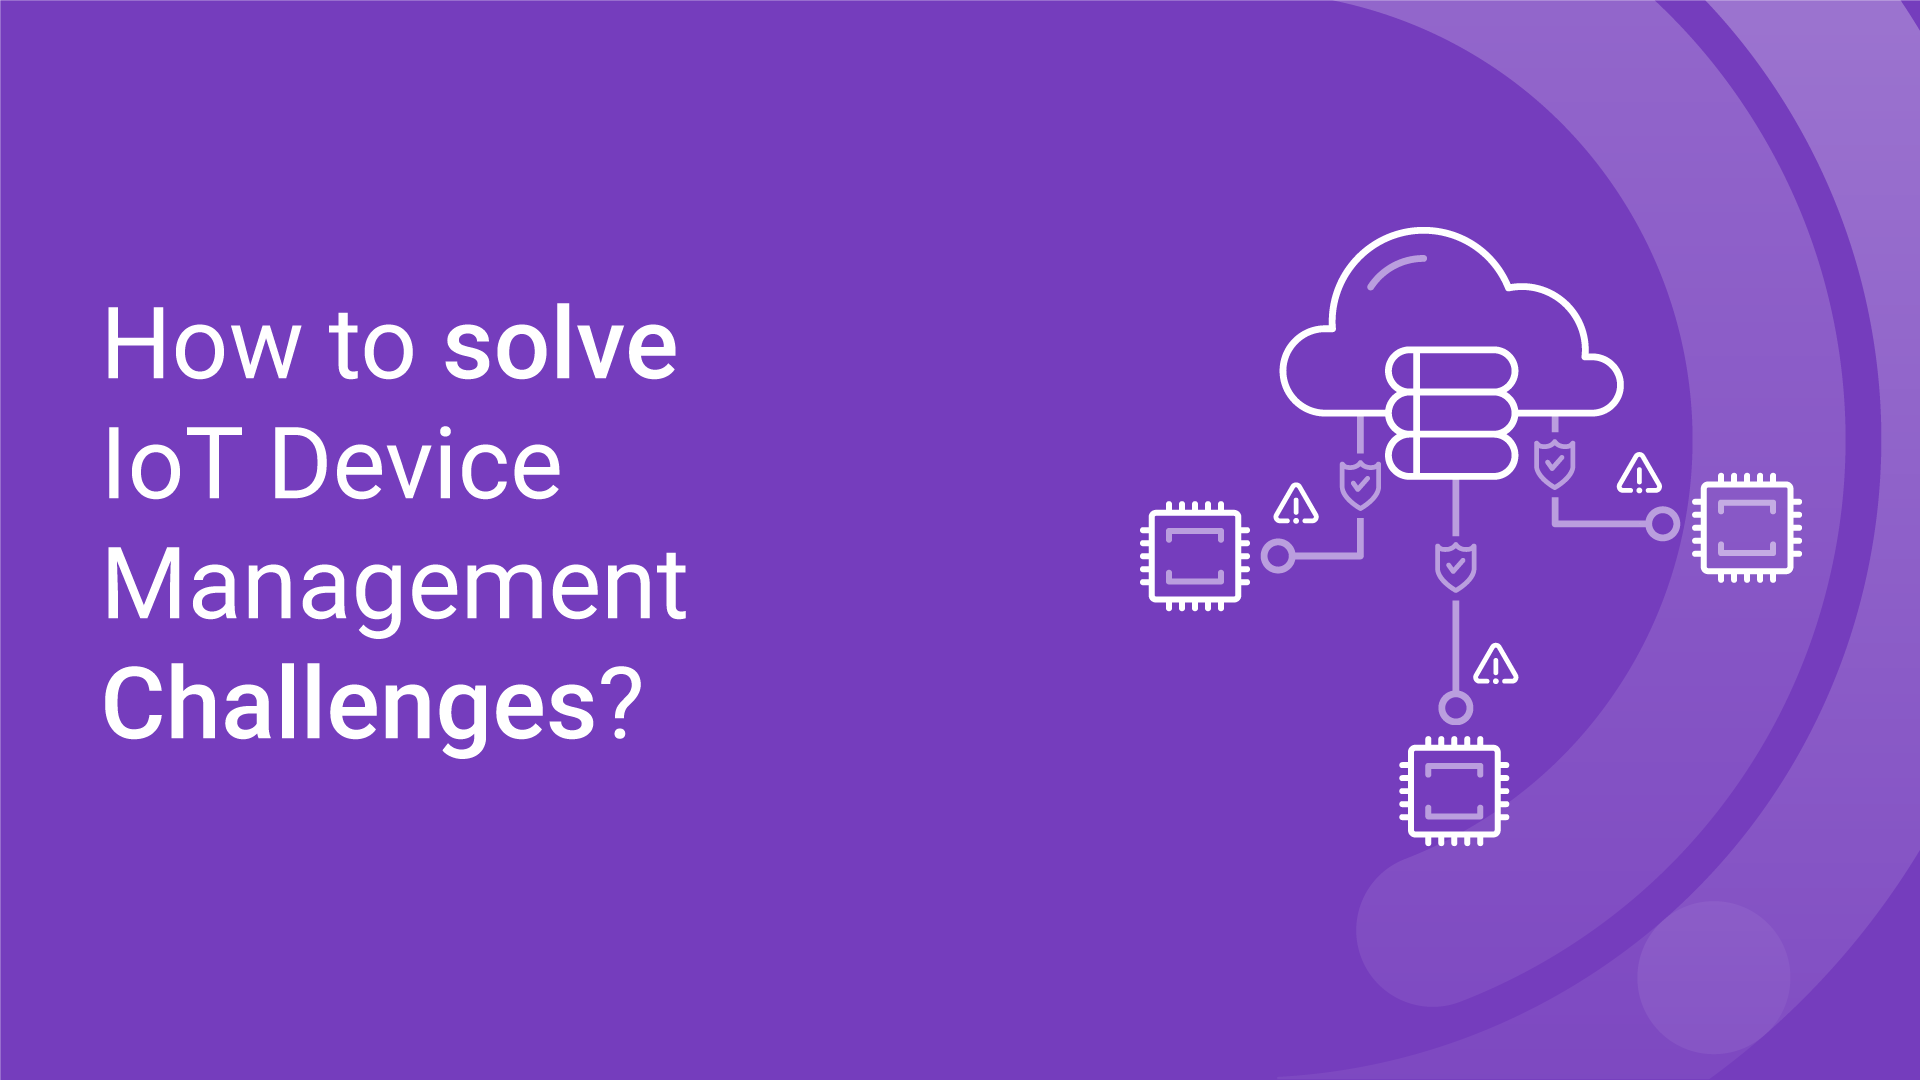 How to solve IoT Device Management Challenges?